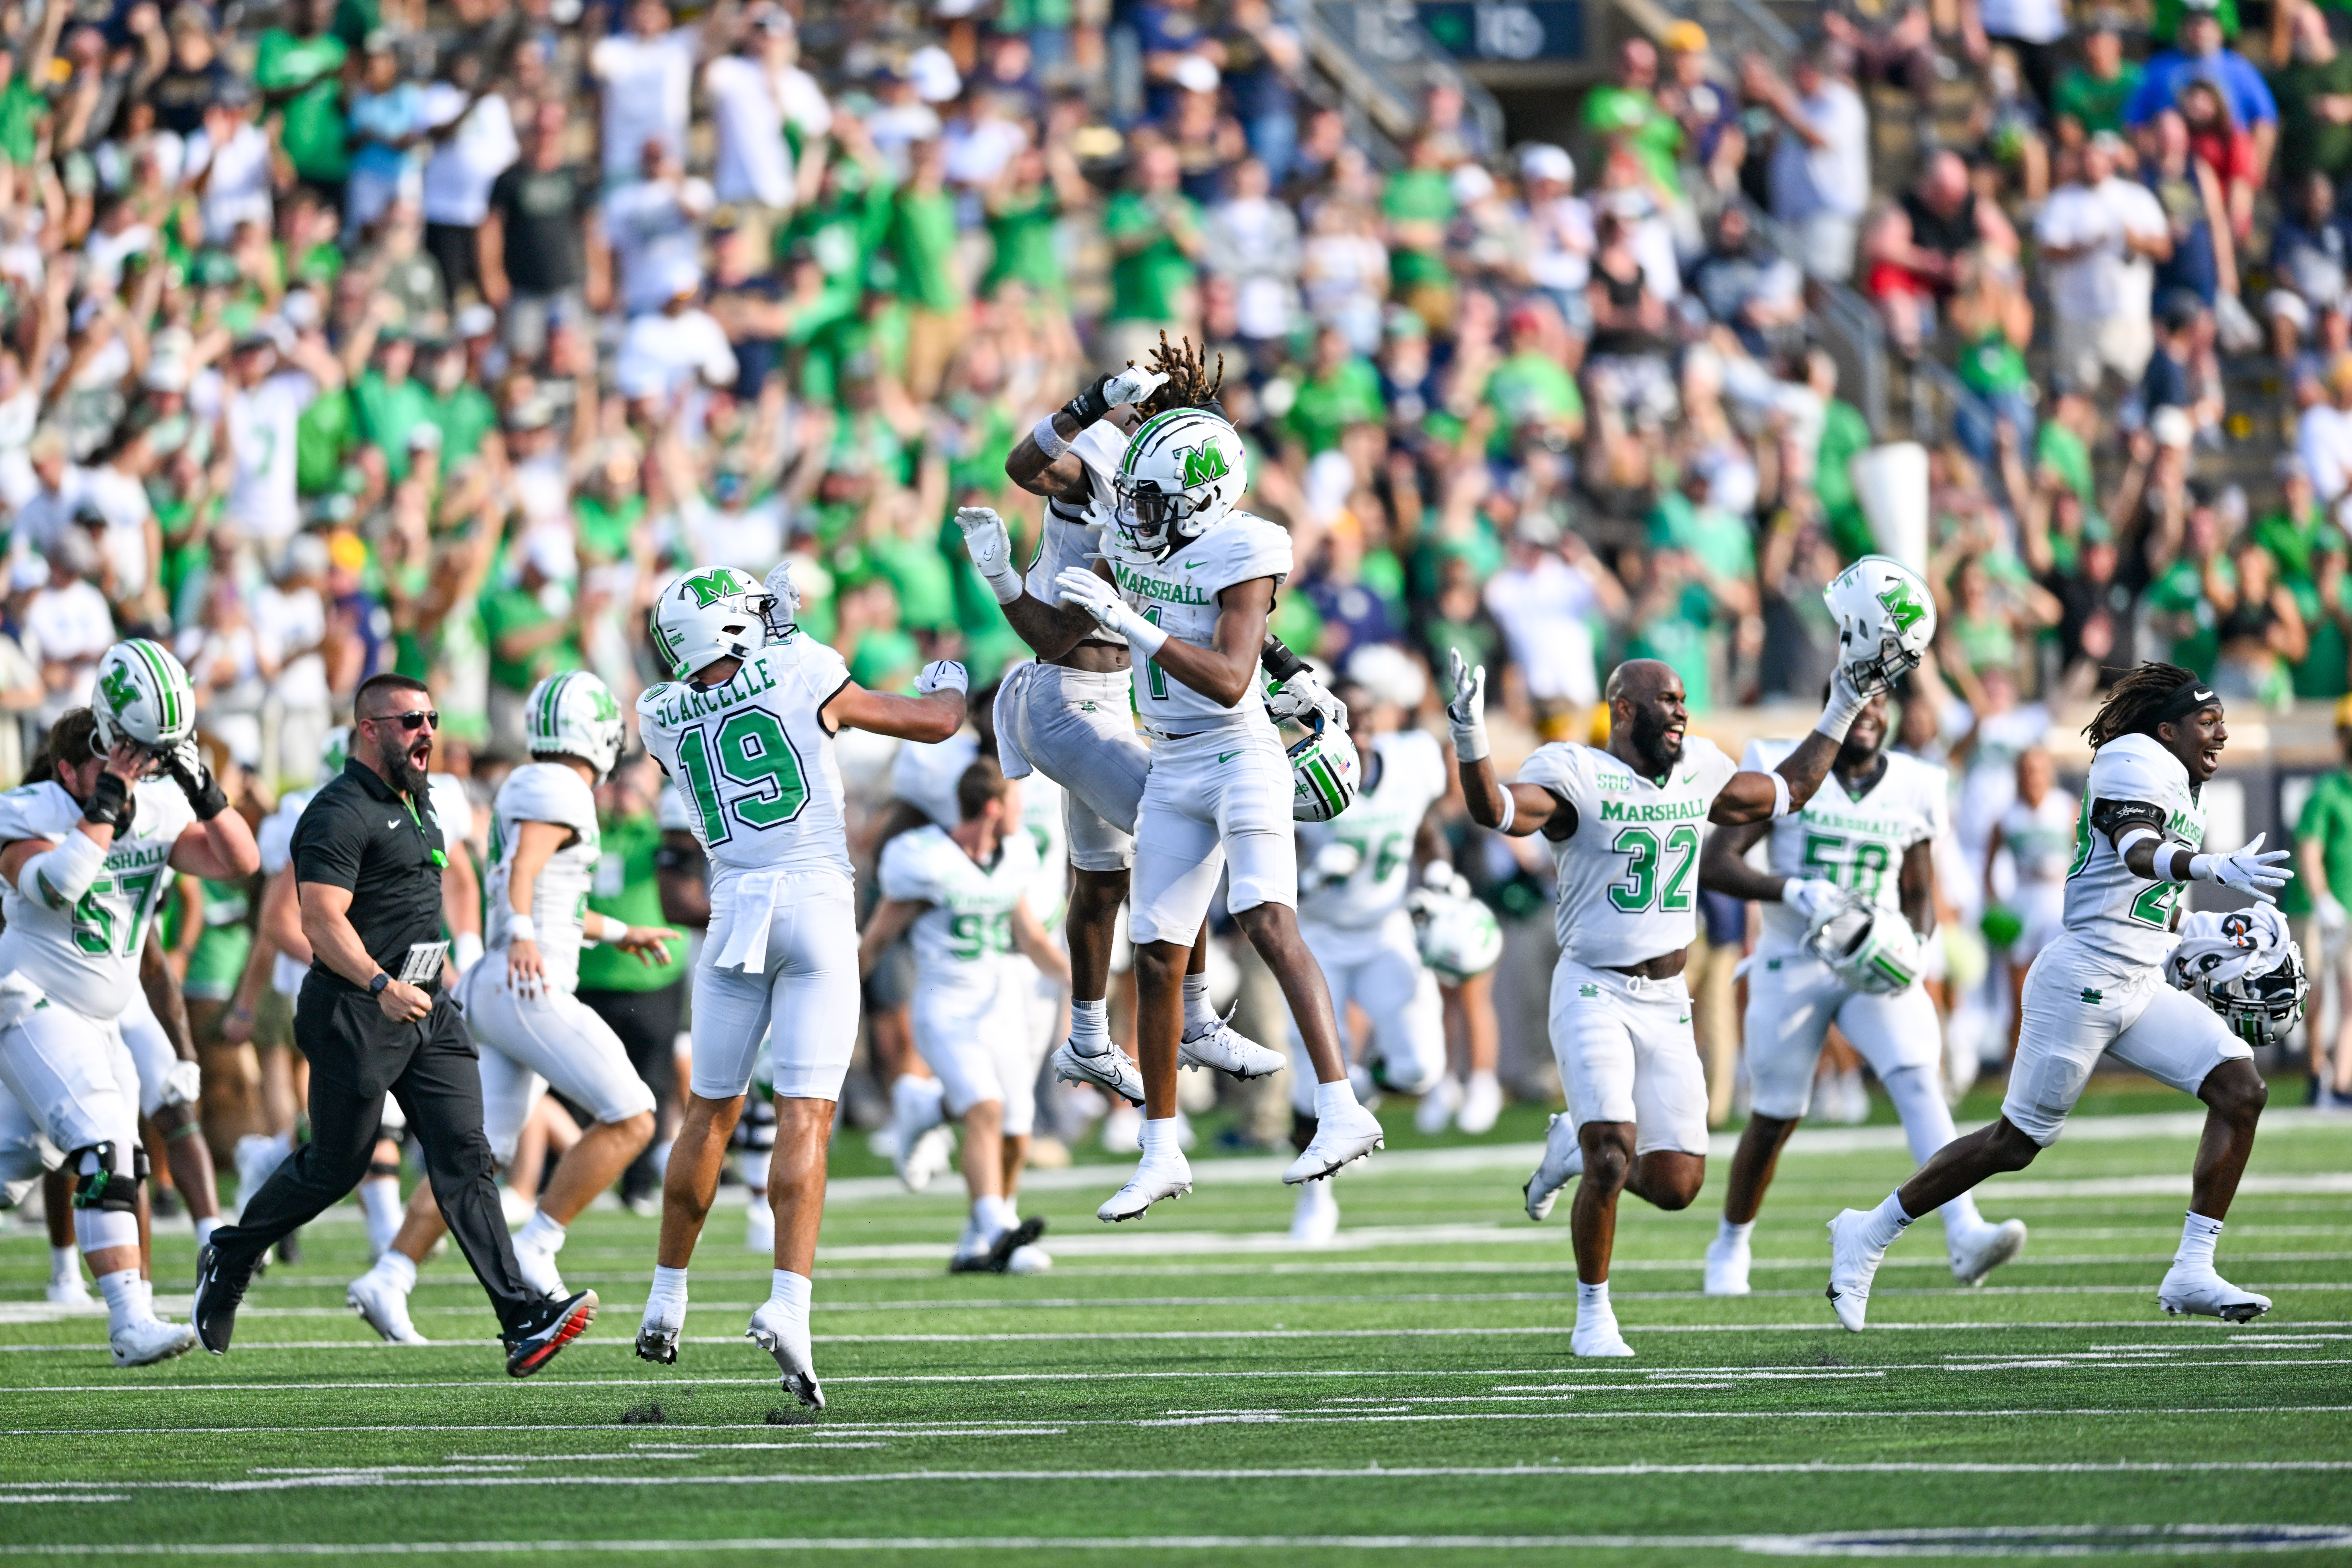 Social media reacts to Notre Dame’s shocking upset loss to Marshall